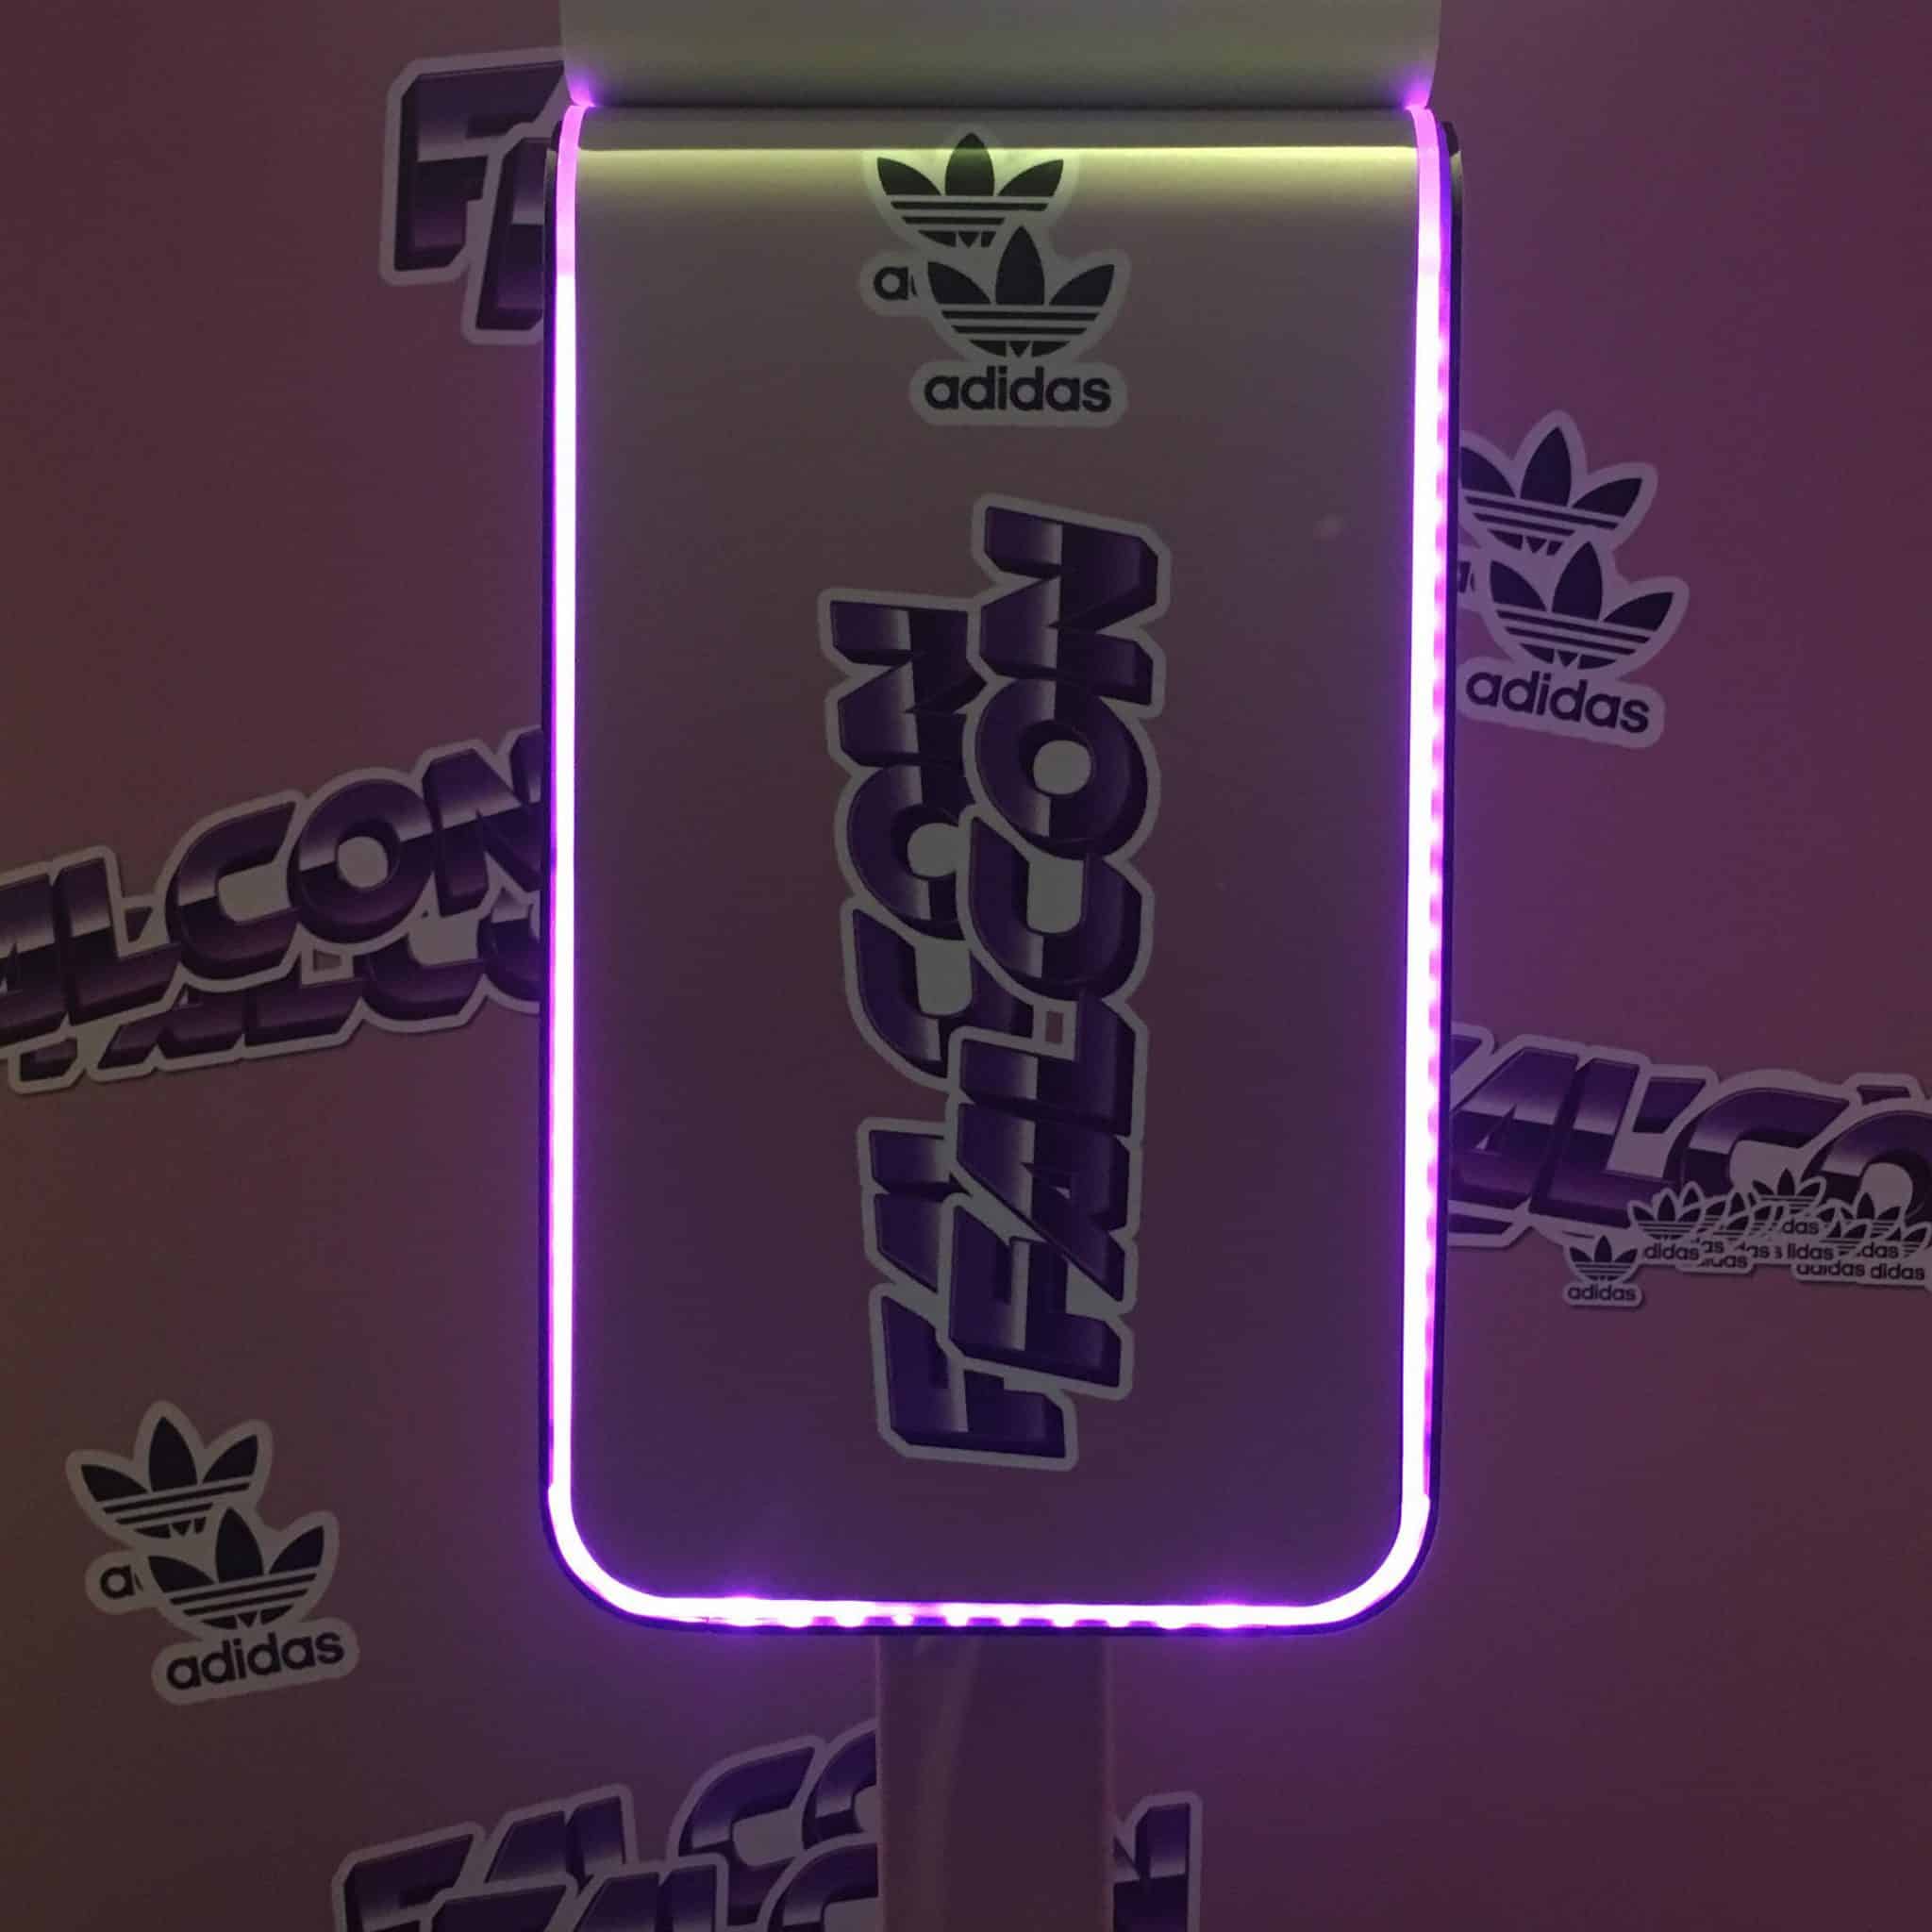 Adidas branded Photo Booth with back drop